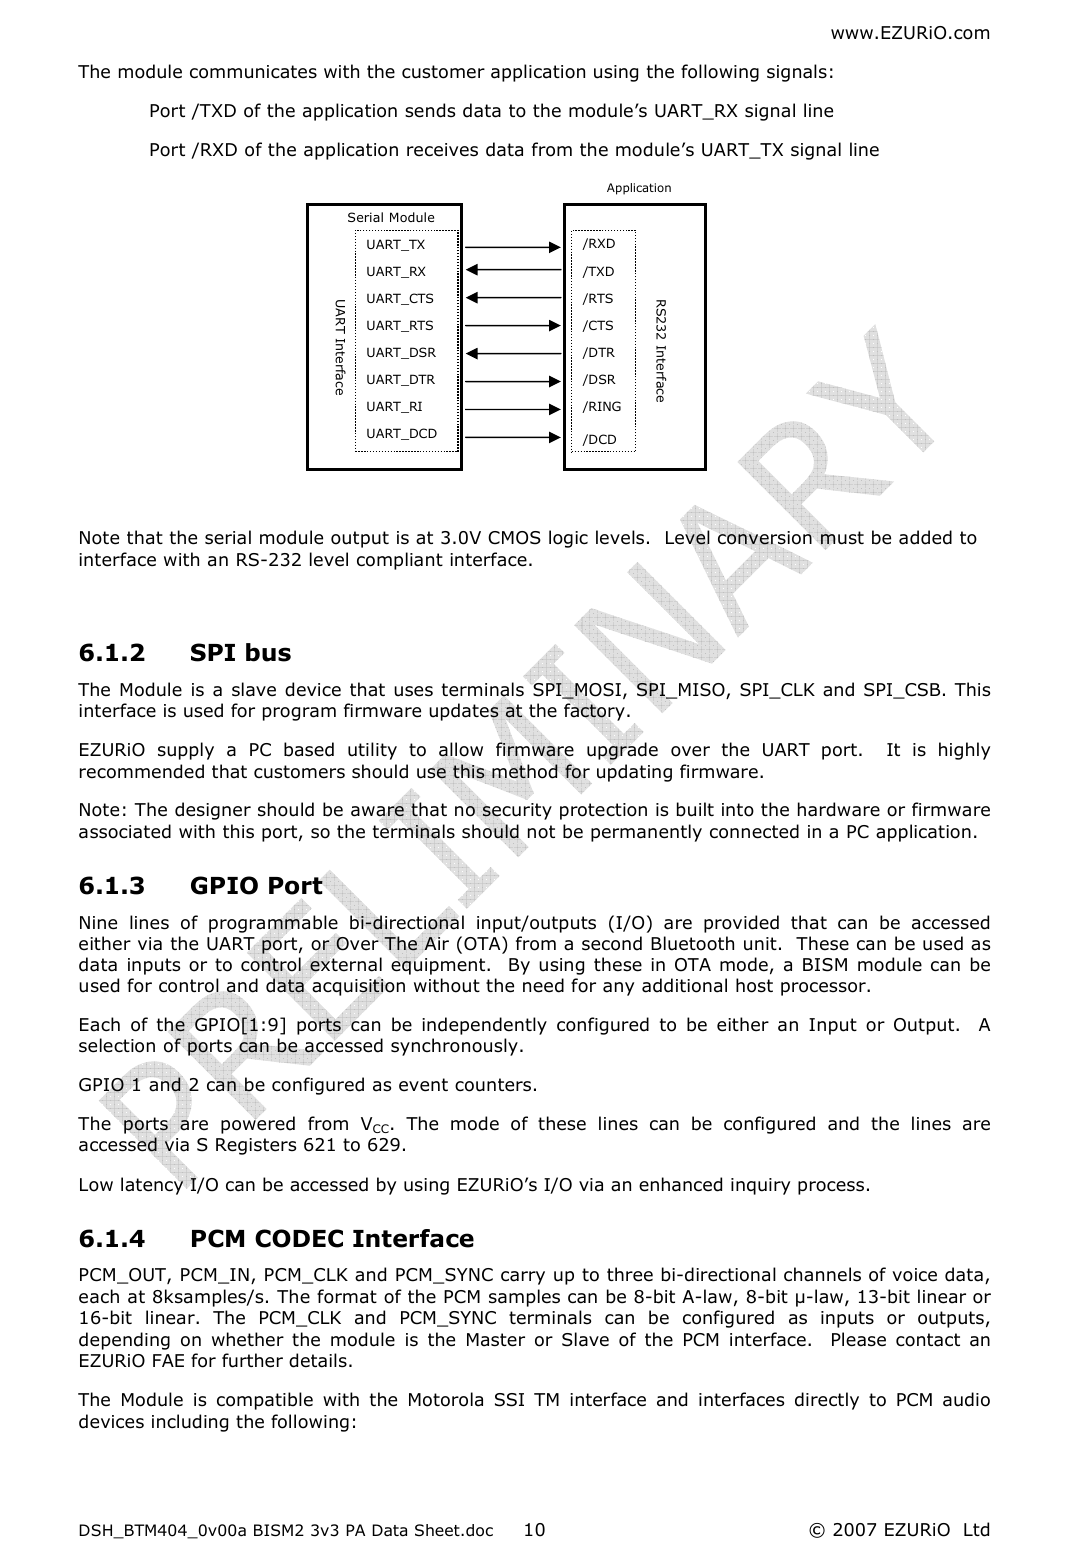 www.EZURiO.com DSH_BTM404_0v00a BISM2 3v3 PA Data Sheet.doc  © 2007 EZURiO  Ltd  10Serial Module  UART Interface UART_TX UART_RX UART_CTS UART_RTS UART_DSR UART_DTR UART_RI UART_DCD /RXD /TXD /RTS /CTS /DTR /DSR /RING /DCD RS232 Interface The module communicates with the customer application using the following signals:  Port /TXD of the application sends data to the module’s UART_RX signal line  Port /RXD of the application receives data from the module’s UART_TX signal line           Note that the serial module output is at 3.0V CMOS logic levels.  Level conversion must be added to interface with an RS-232 level compliant interface.  6.1.2 SPI bus The Module is a  slave device that uses terminals SPI_MOSI, SPI_MISO, SPI_CLK and SPI_CSB. This interface is used for program firmware updates at the factory.  EZURiO  supply  a  PC  based  utility  to  allow  firmware  upgrade  over  the  UART  port.    It  is  highly recommended that customers should use this method for updating firmware. Note: The designer should be aware that no security protection is built into the hardware or firmware associated with this port, so the terminals should not be permanently connected in a PC application. 6.1.3 GPIO Port  Nine  lines  of  programmable  bi-directional  input/outputs  (I/O)  are  provided  that  can  be  accessed either via the UART port, or Over The Air (OTA) from a second Bluetooth unit.  These can be used as data inputs or to control external equipment.  By using these in OTA mode, a BISM module can be used for control and data acquisition without the need for any additional host processor. Each  of  the  GPIO[1:9]  ports  can  be  independently  configured  to  be  either  an  Input  or  Output.    A selection of ports can be accessed synchronously. GPIO 1 and 2 can be configured as event counters. The  ports  are  powered  from  VCC.  The  mode  of  these  lines  can  be  configured  and  the  lines  are accessed via S Registers 621 to 629. Low latency I/O can be accessed by using EZURiO’s I/O via an enhanced inquiry process. 6.1.4 PCM CODEC Interface PCM_OUT, PCM_IN, PCM_CLK and PCM_SYNC carry up to three bi-directional channels of voice data, each at 8ksamples/s. The format of the PCM samples can be 8-bit A-law, 8-bit µ-law, 13-bit linear or 16-bit  linear.  The  PCM_CLK  and  PCM_SYNC  terminals  can  be  configured  as  inputs  or  outputs, depending  on  whether  the  module  is  the  Master  or  Slave  of  the  PCM  interface.    Please  contact  an EZURiO FAE for further details. The  Module  is  compatible  with  the  Motorola  SSI  TM  interface  and  interfaces  directly  to  PCM  audio devices including the following:  Application 